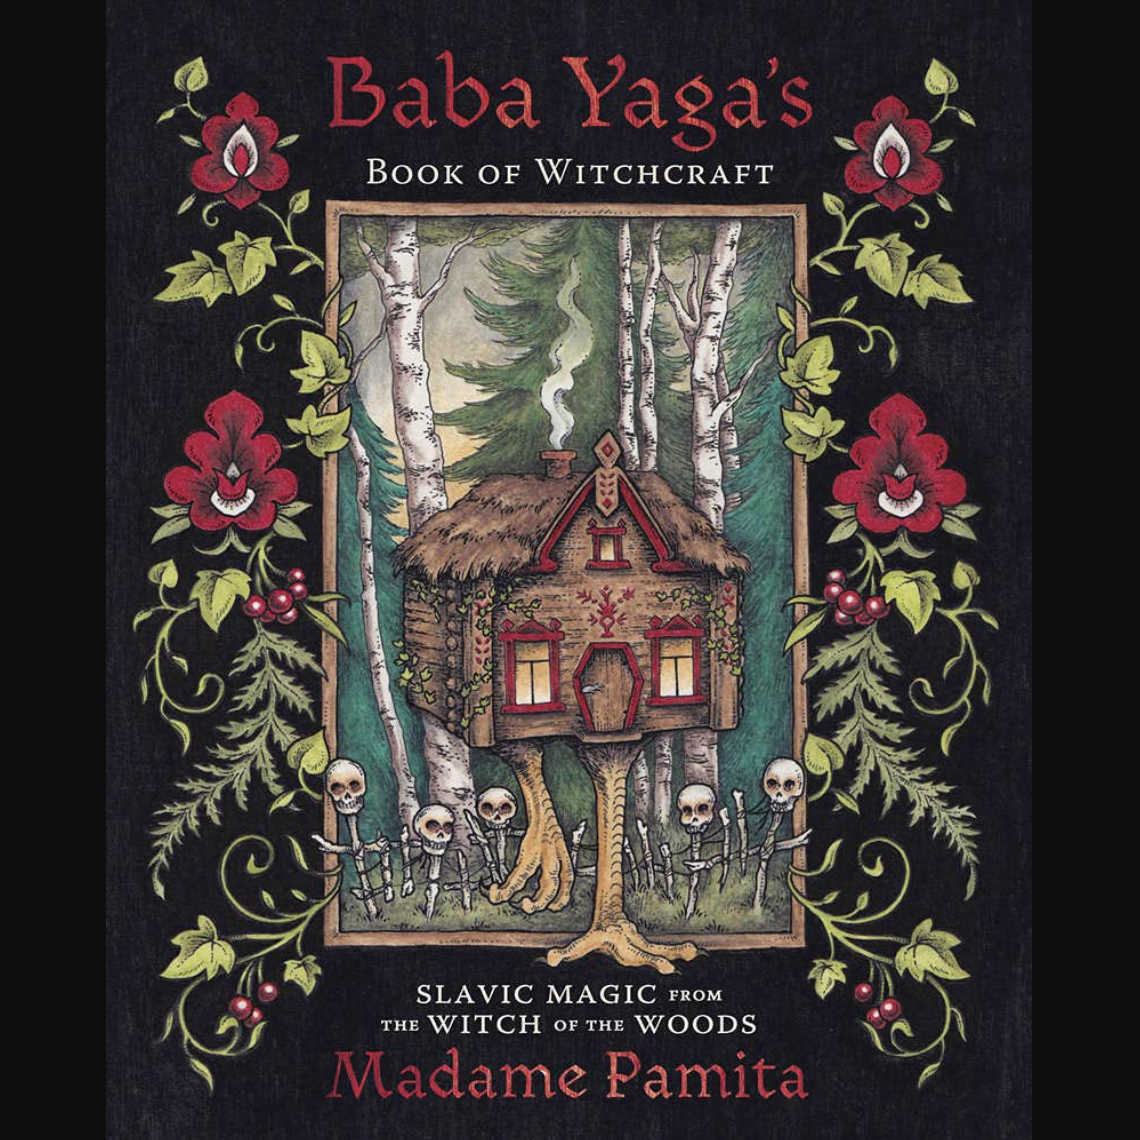 Discover Ukrainian Magic With This Witch’s Guide To Slavic Folklore & Baba Yaga